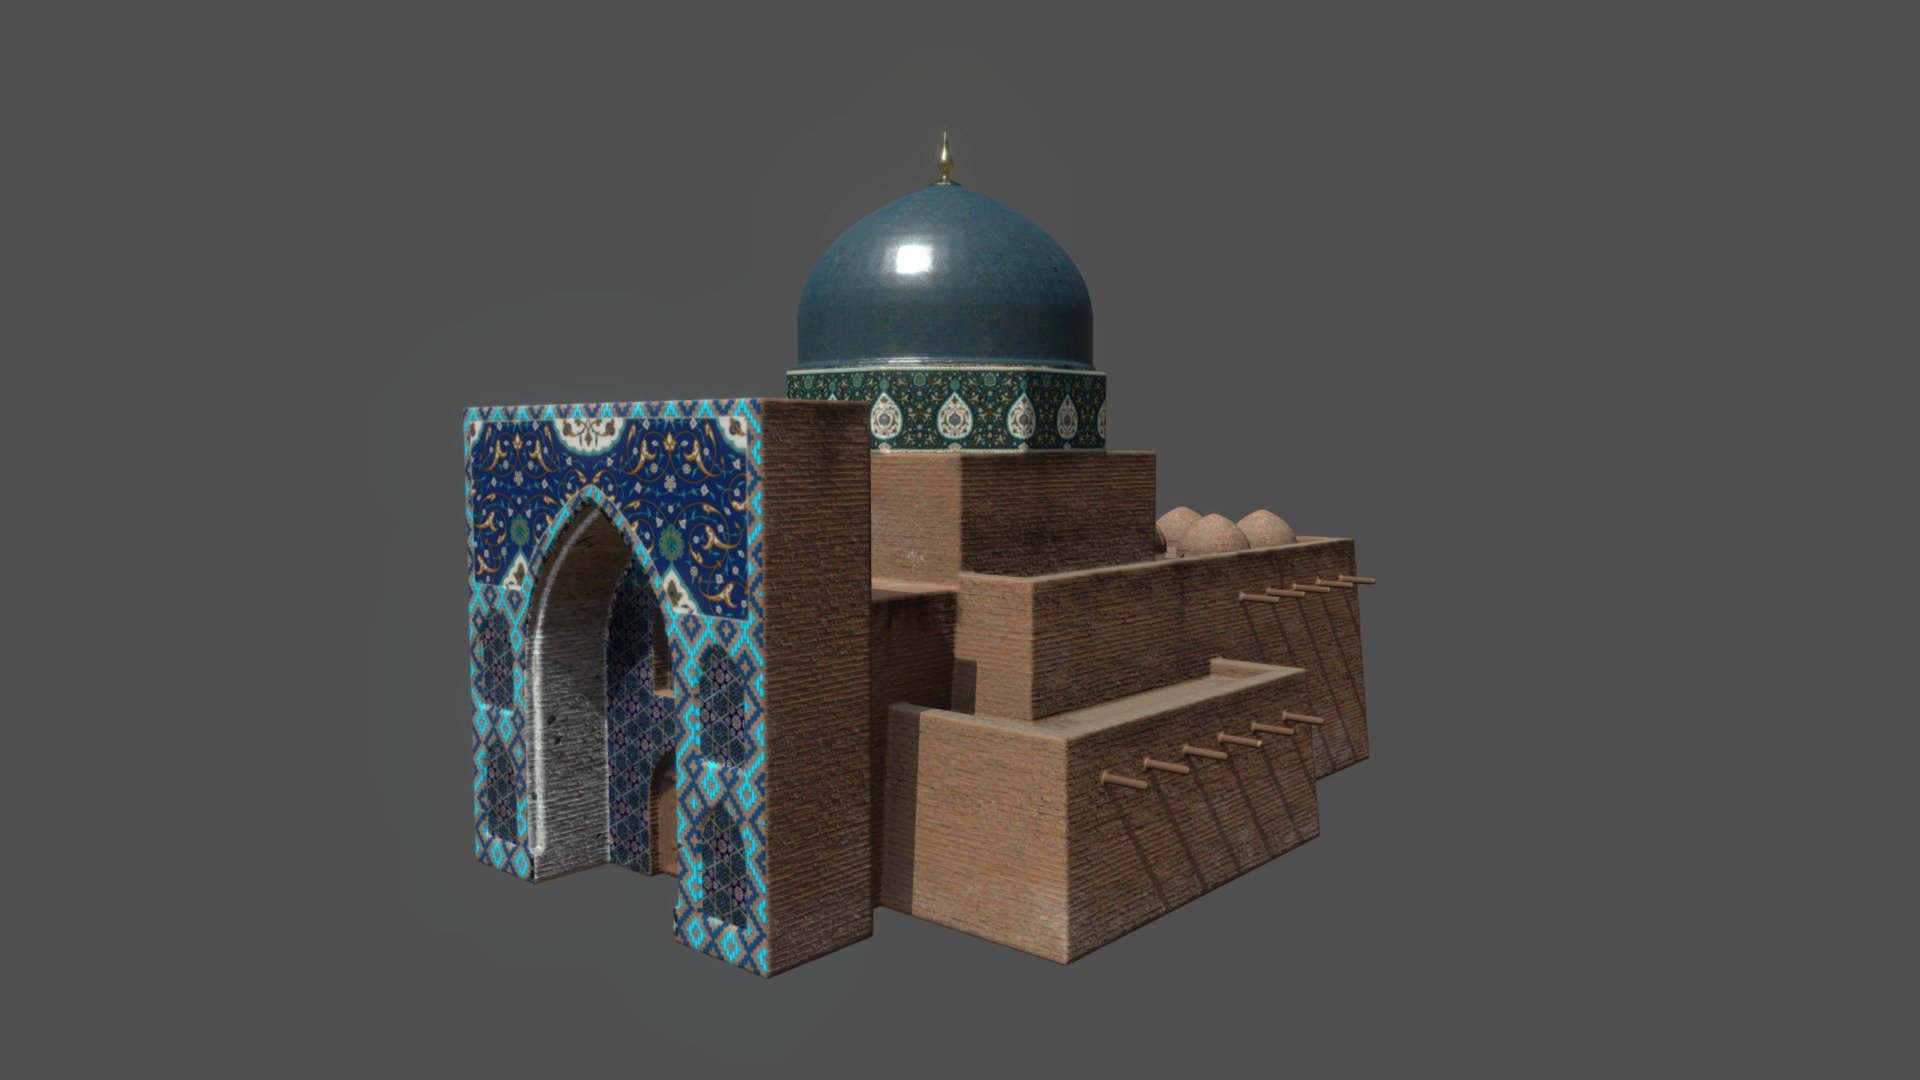 The 3D model consists of a whole model without parts. I built it completely from scratch without using third-party resource packs, using several modeling and texturing programs. This model is well suited for creating the environment and ranged renders. Recommended for environment artists - Samarkand_Historical_Building - 3D model by Iskandar (@i.r.letterbox) 3d model